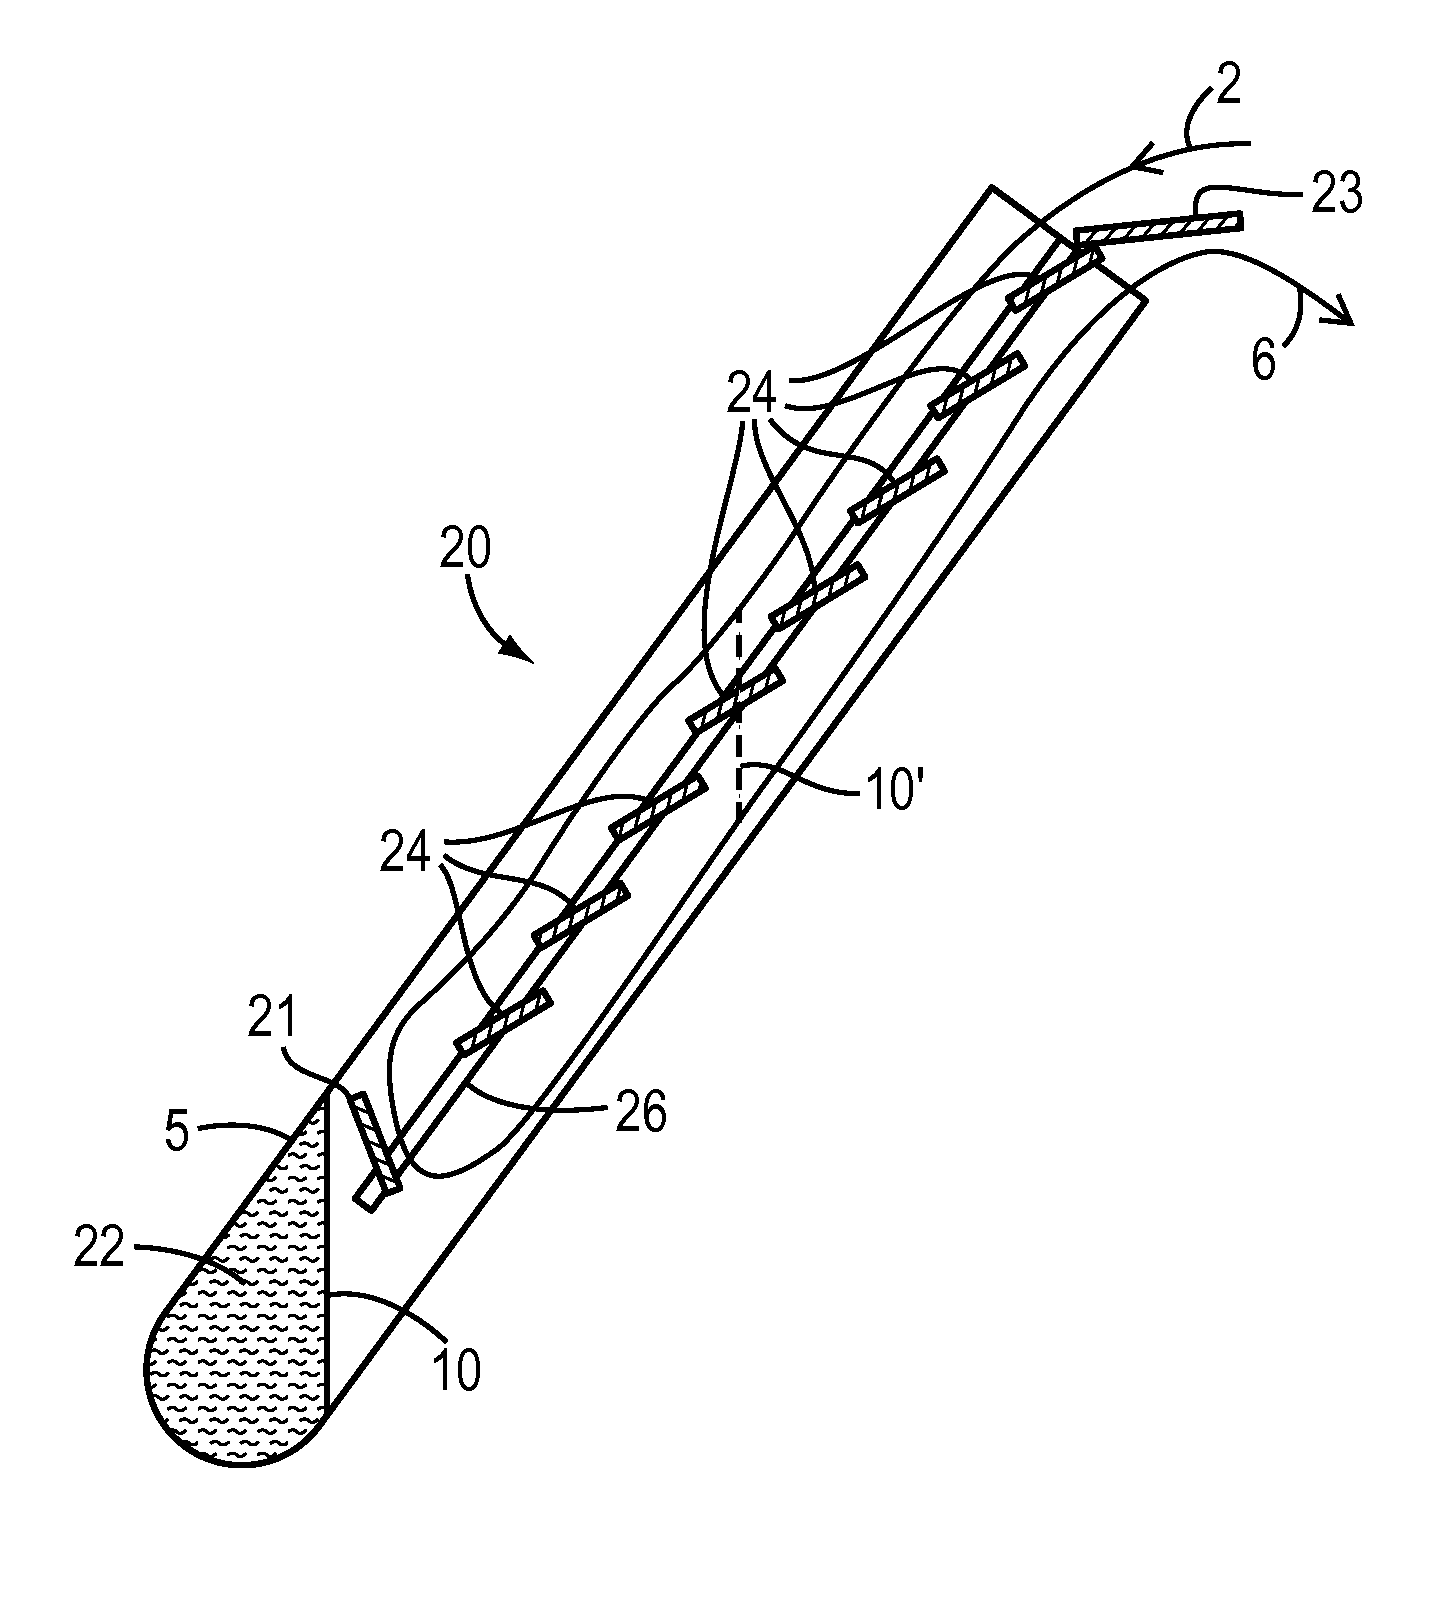 Device and method for increasing evaporation rates of blow-down apparatus